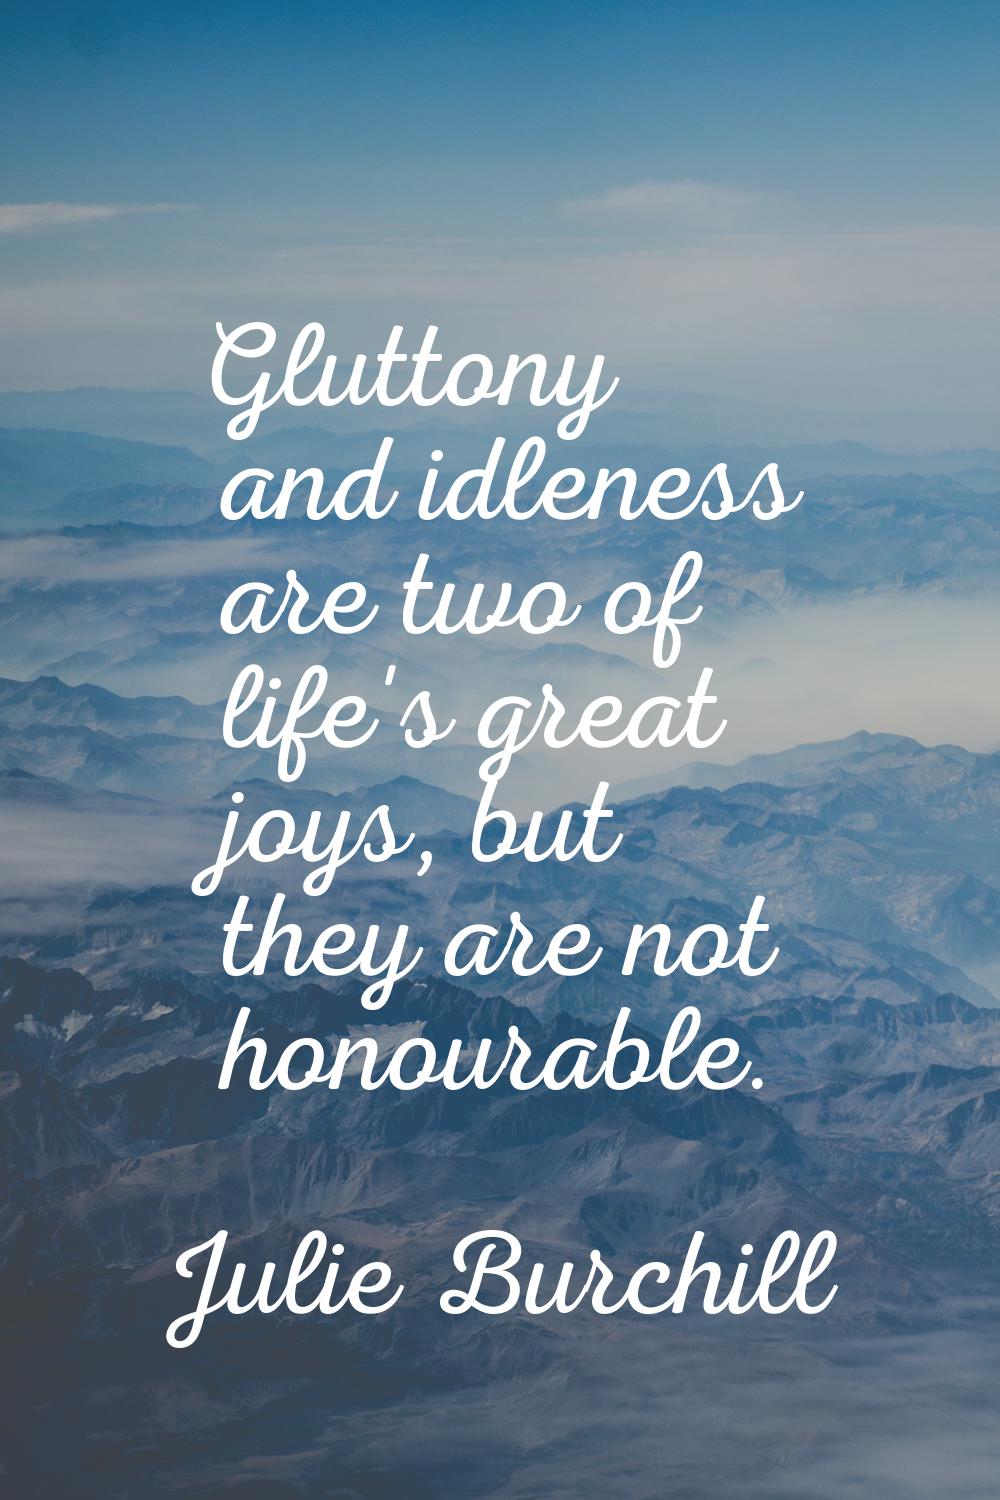 Gluttony and idleness are two of life's great joys, but they are not honourable.